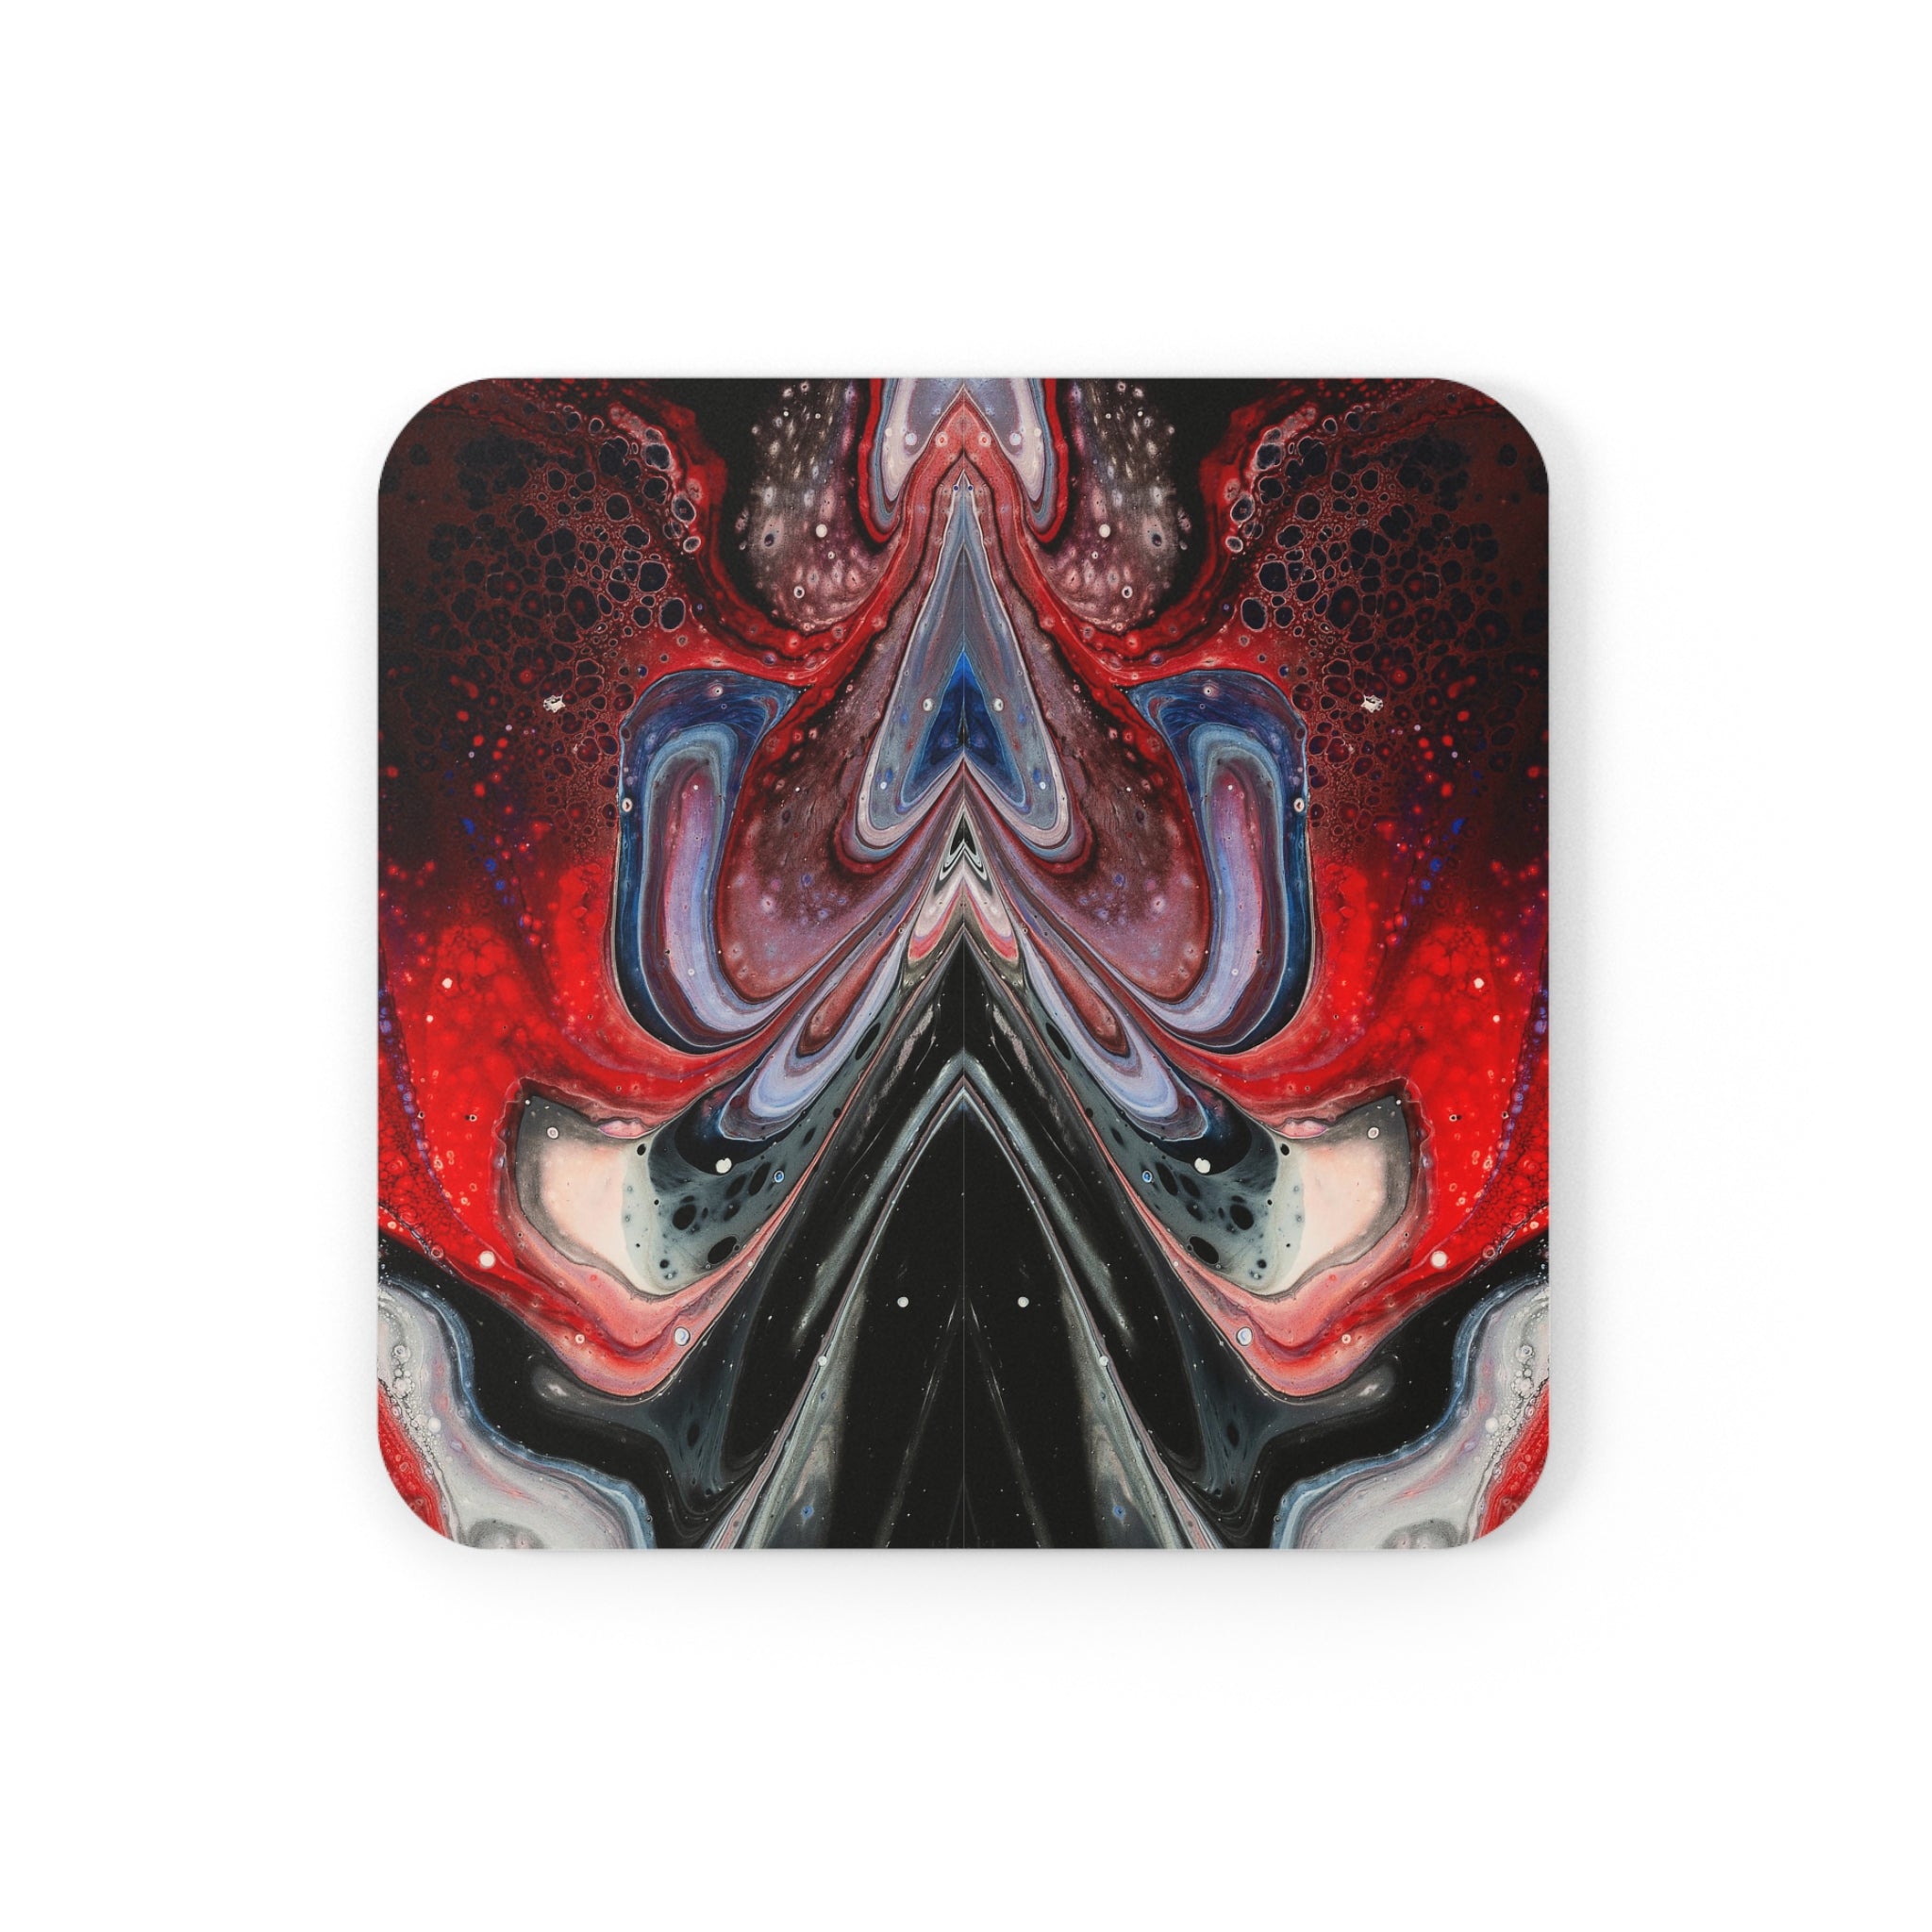 Cameron Creations - Window View - Stylish Coffee Coaster - Square Front